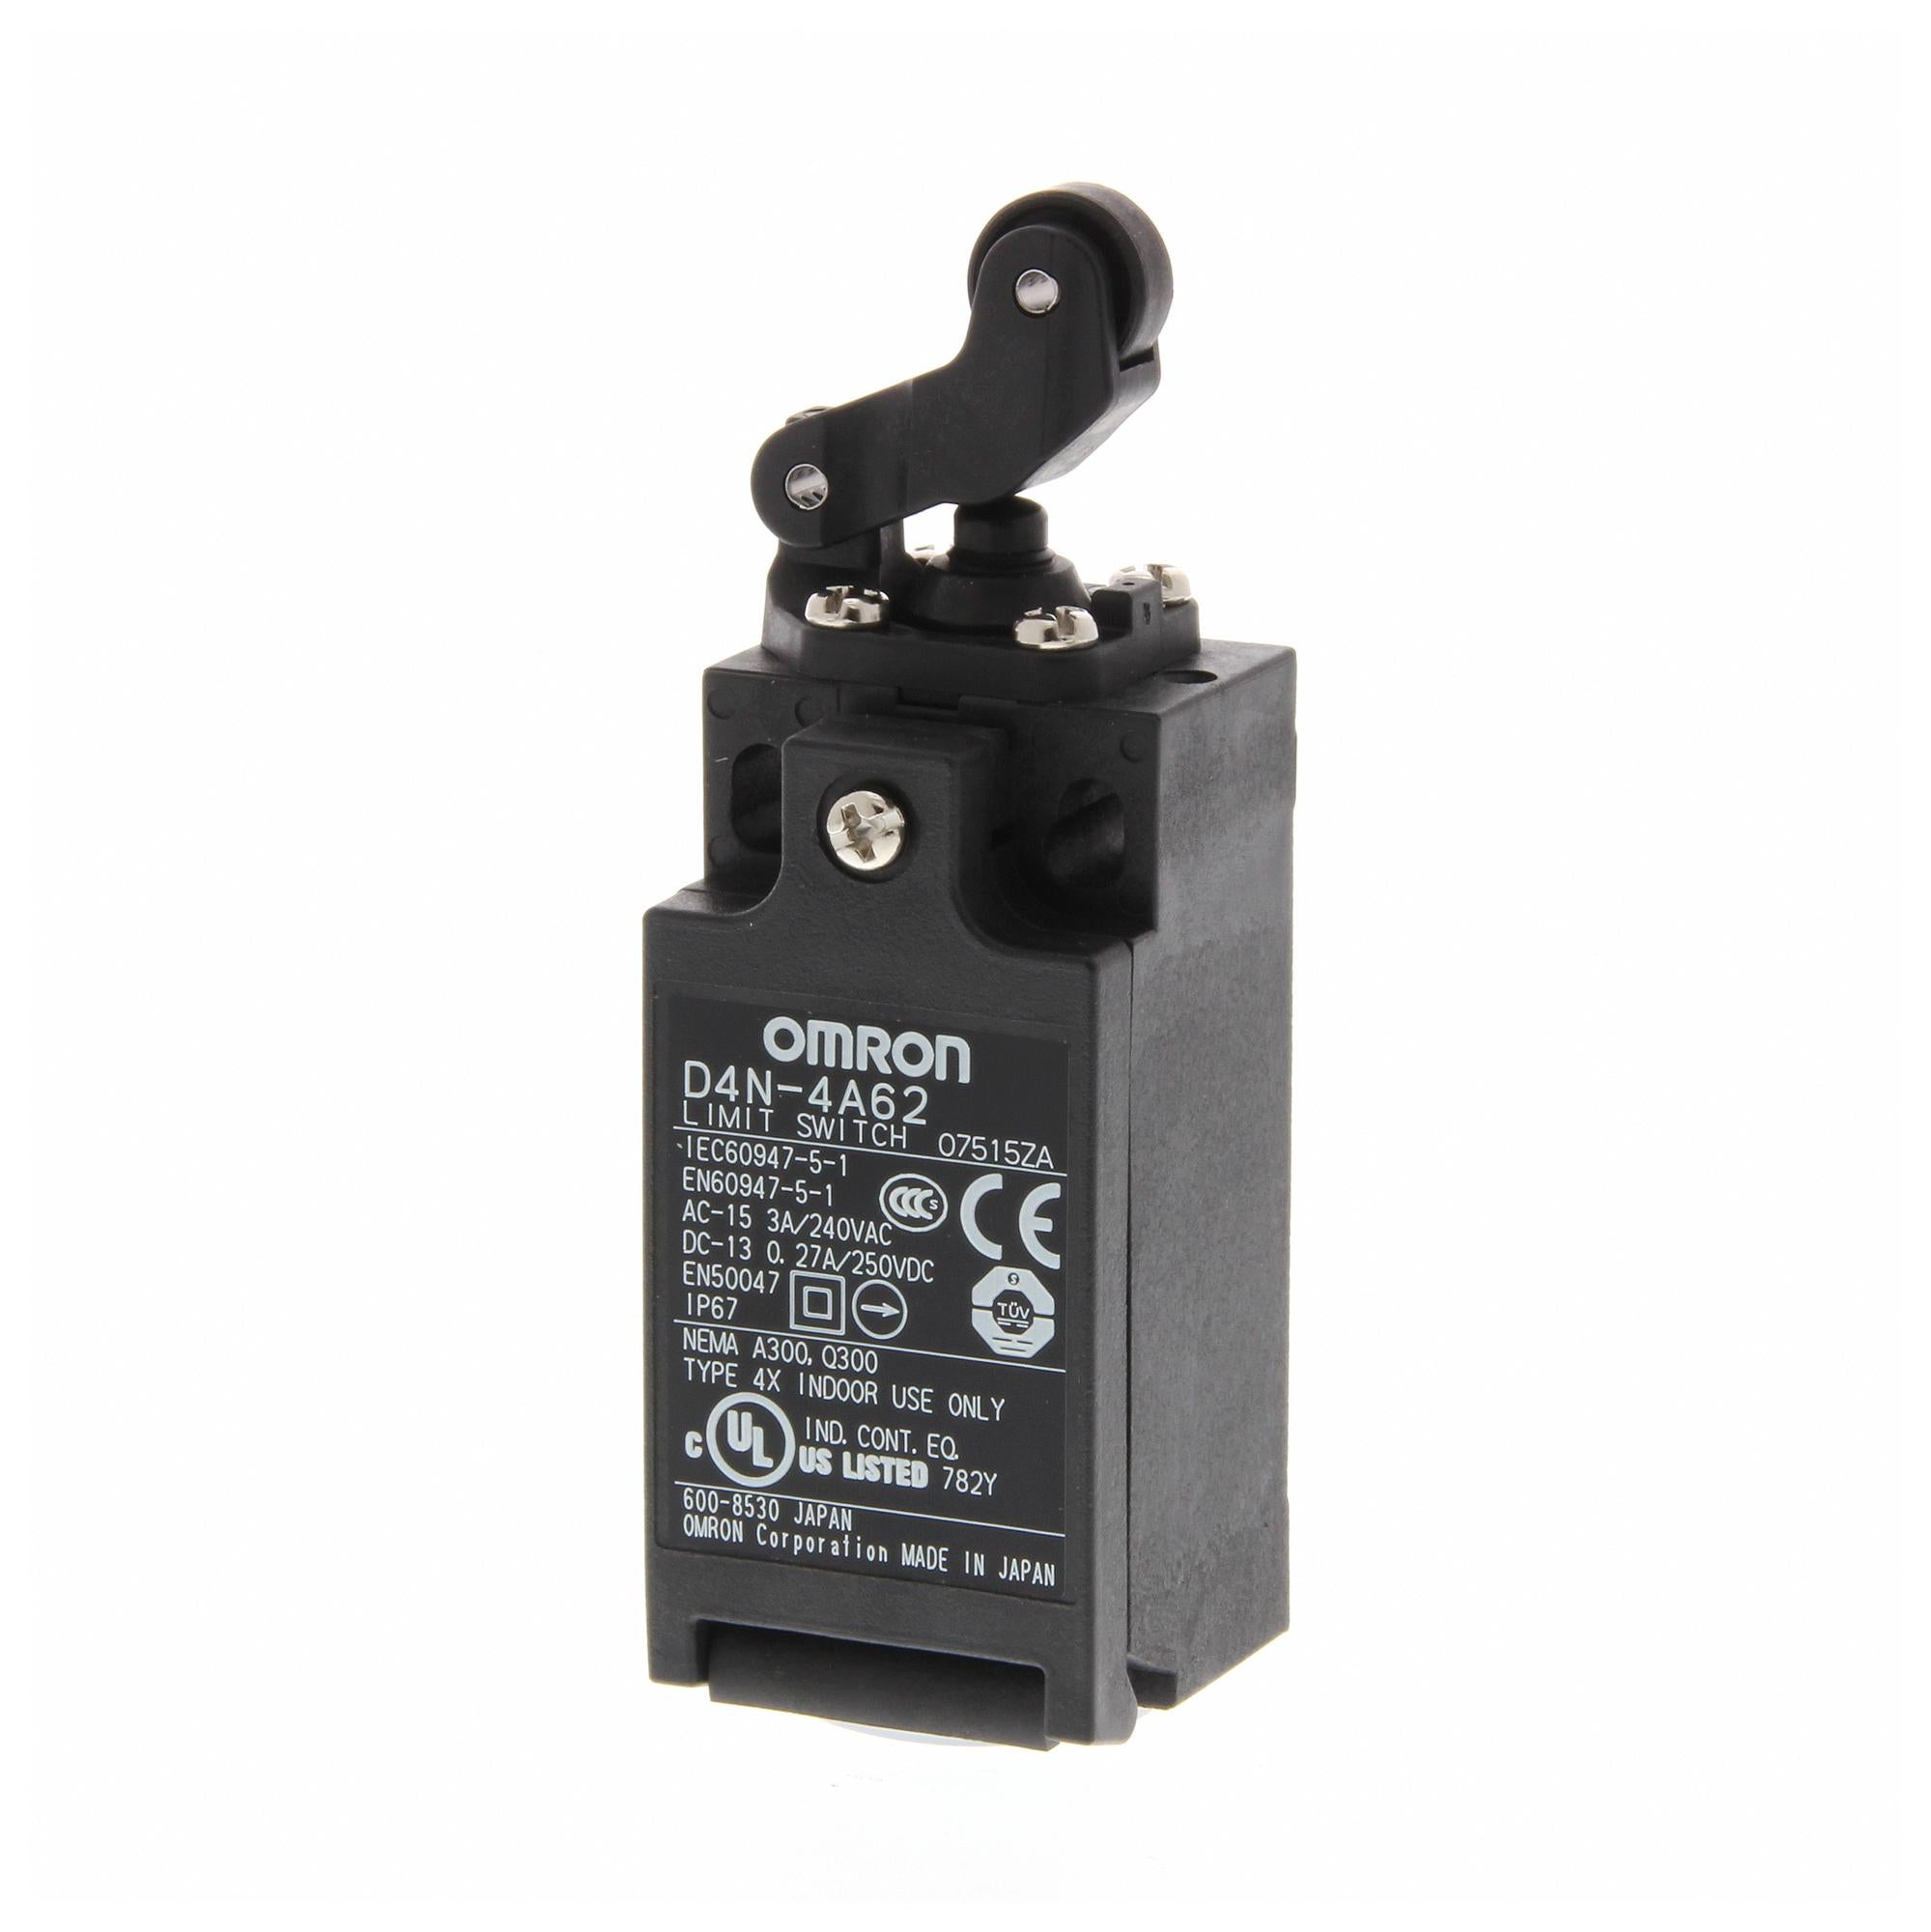 D4N-4A62 LIMIT SWITCH SWITCHES OMRON